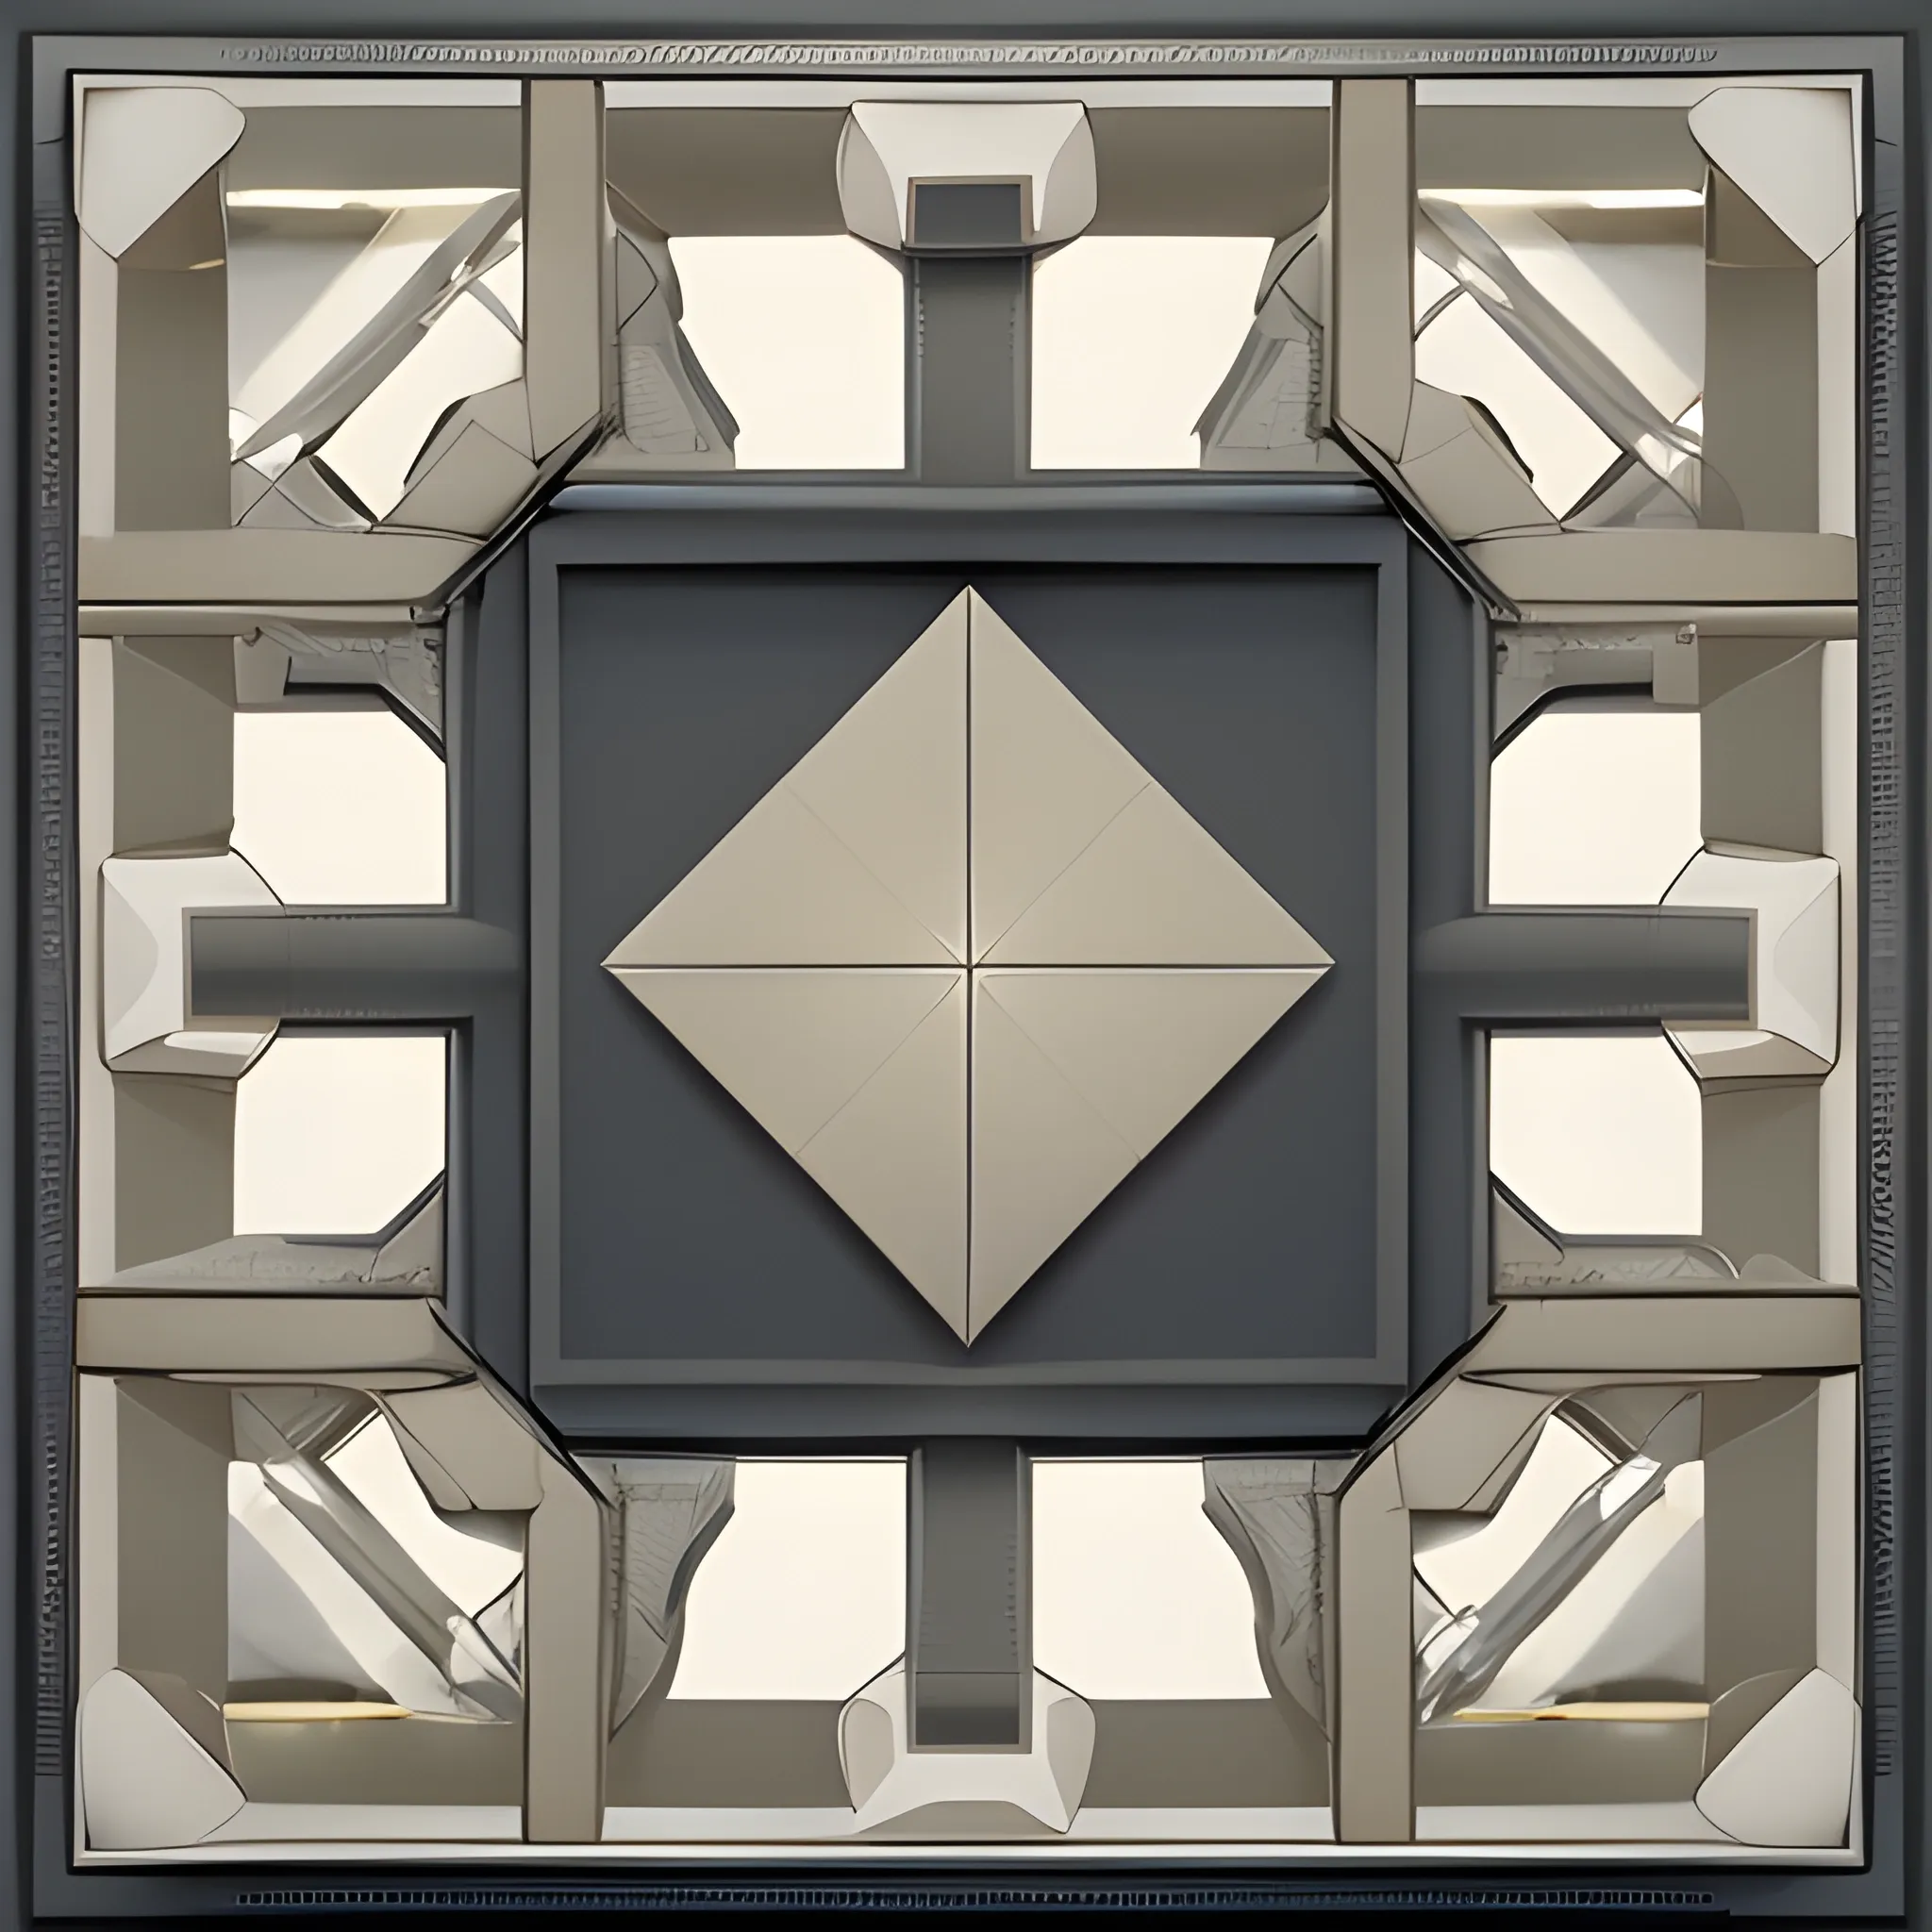 Composition Layout: nine-grid layout, uniform cell sizes, balance, symmetry
Color Scheme: subdued color palette, light gray, soft beige, professionalism
Visual Focus: high-resolution, weapon model image, clear, rich in detail
Detail Enhancement: lighting effects, reflections, glossiness, shadows, three-dimensionality